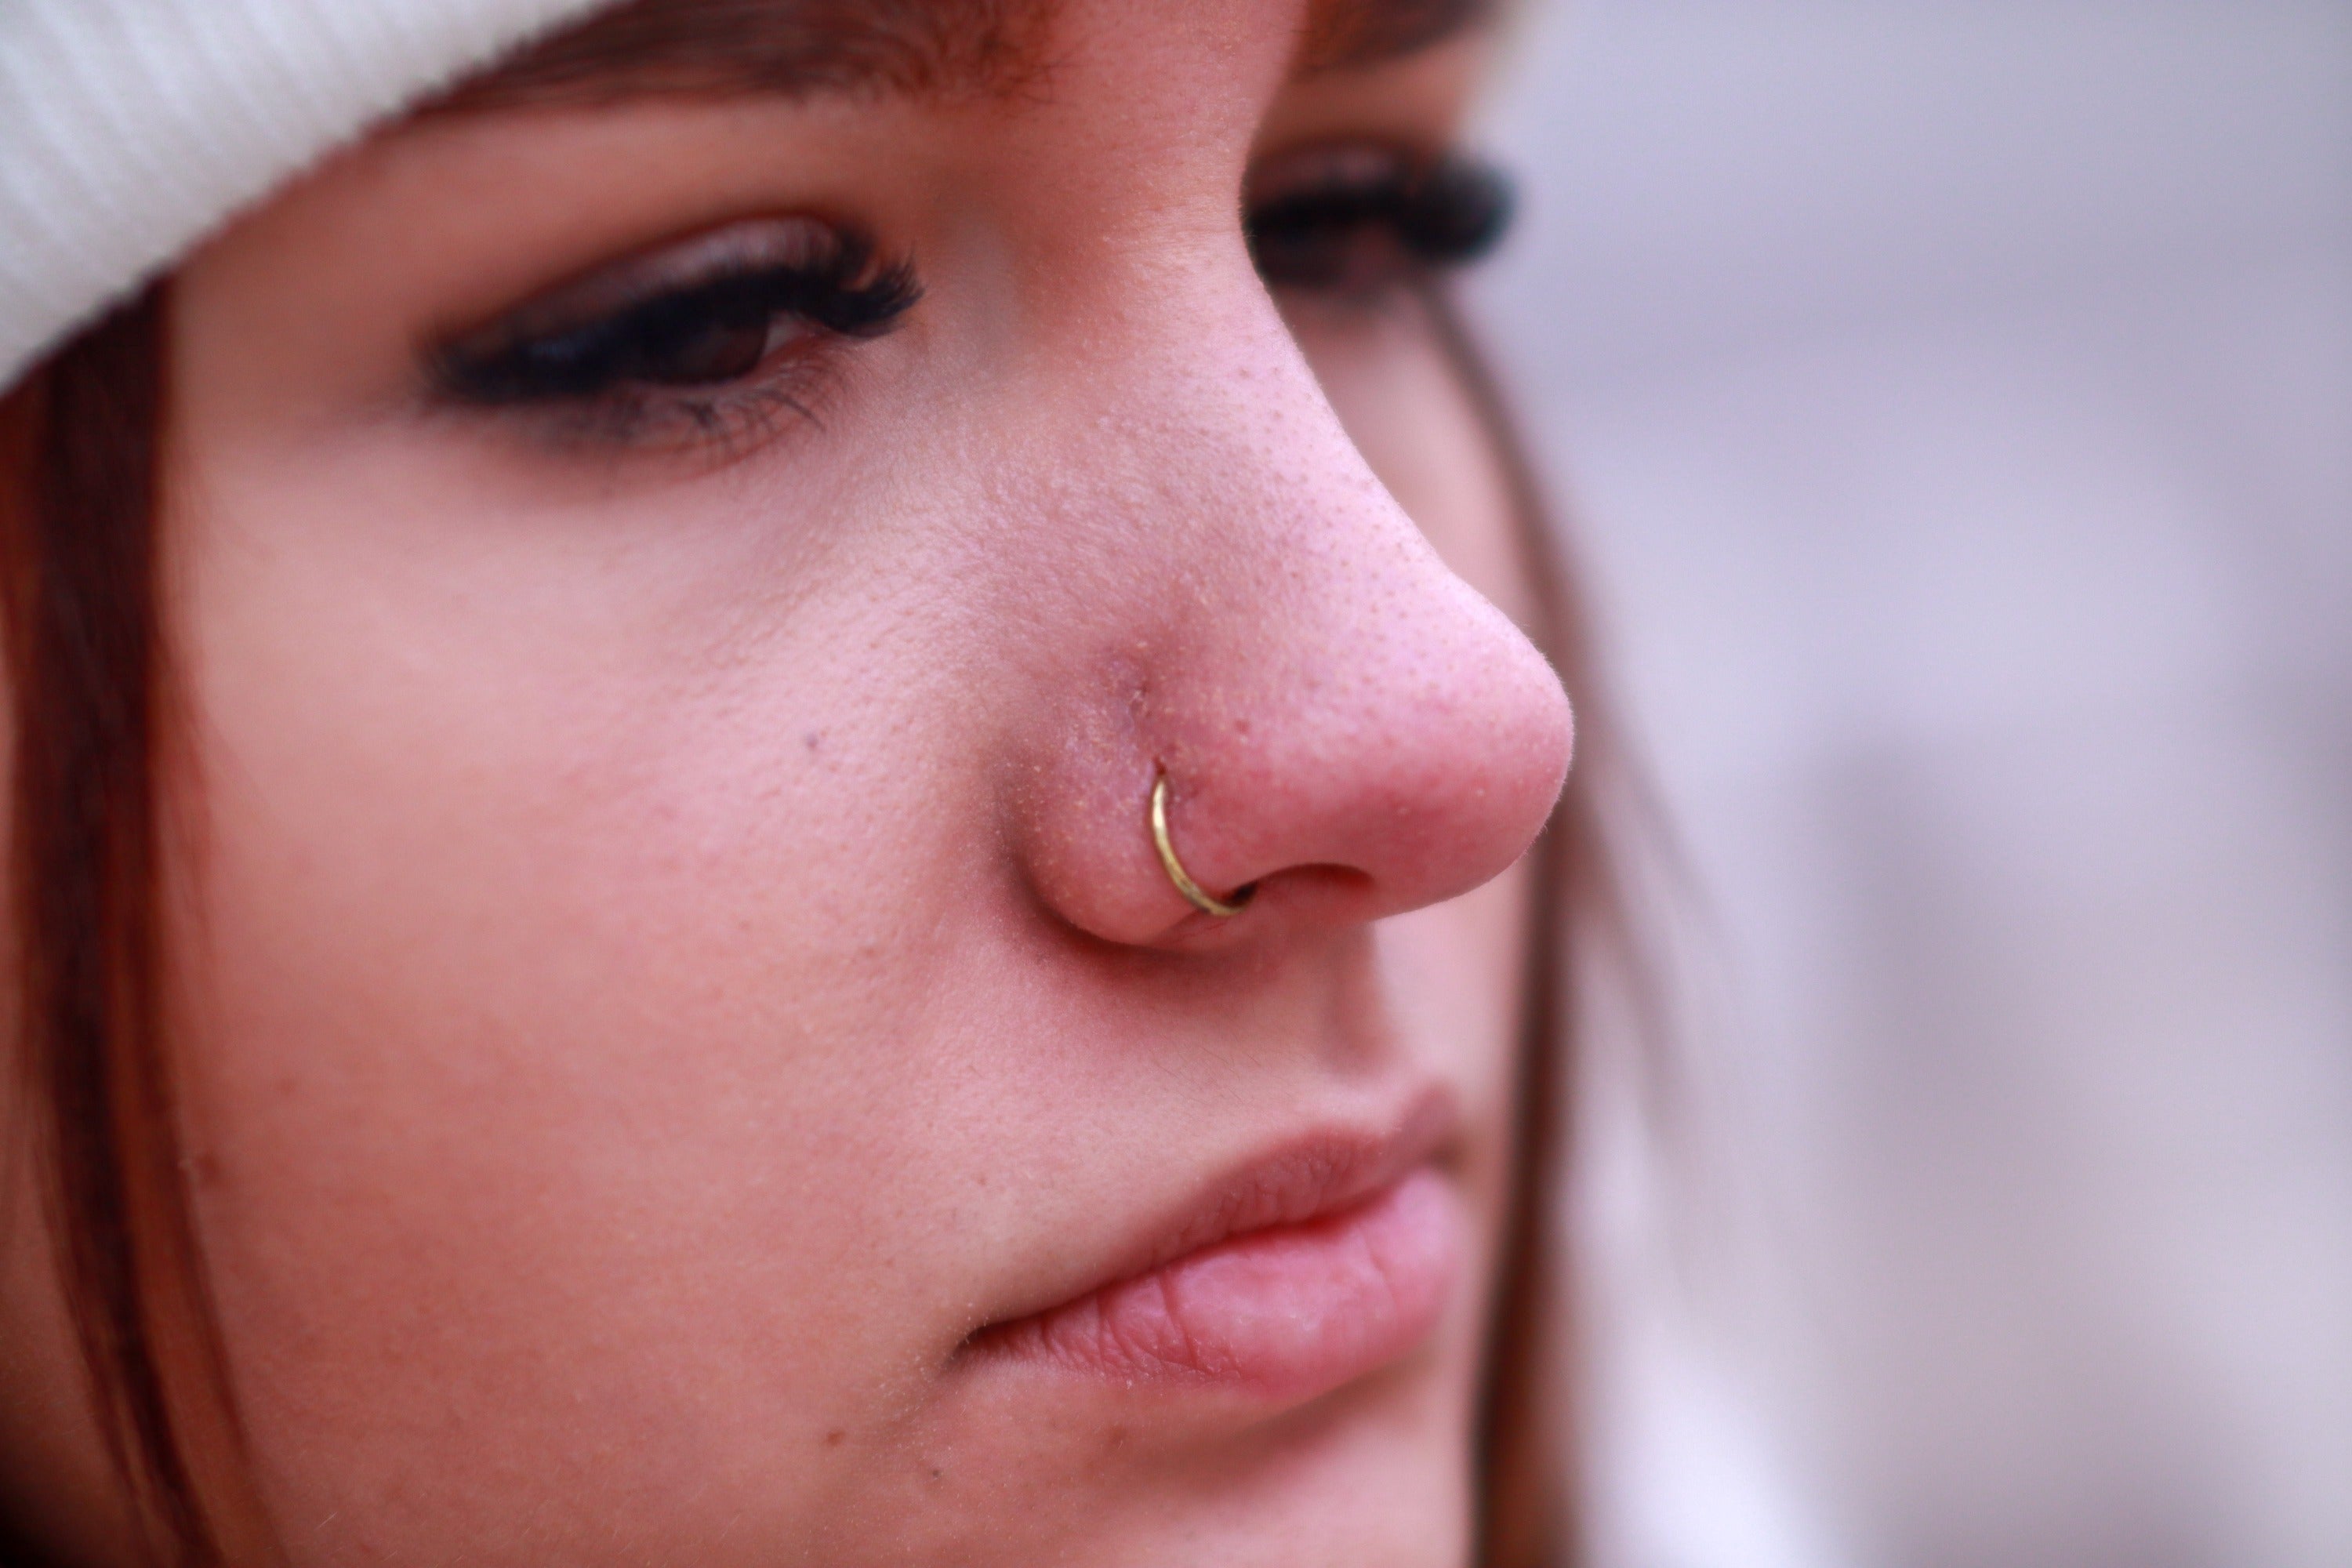 Nose Piercing Cleaning Risks